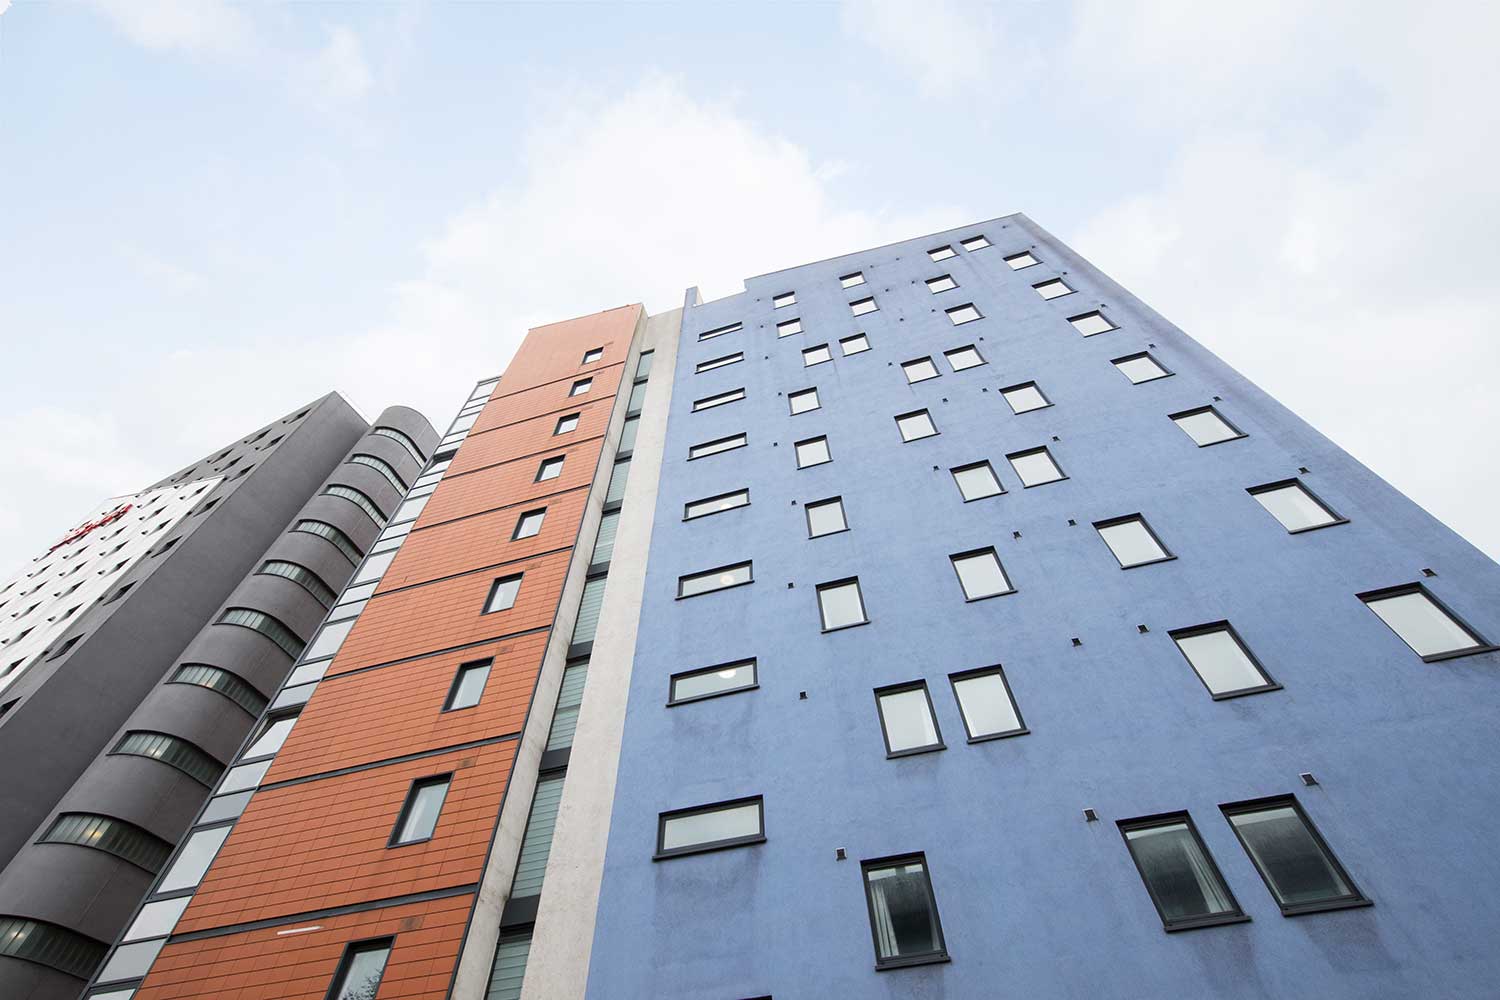 Unite Students accommodation at Hepworth Lodge in Leeds